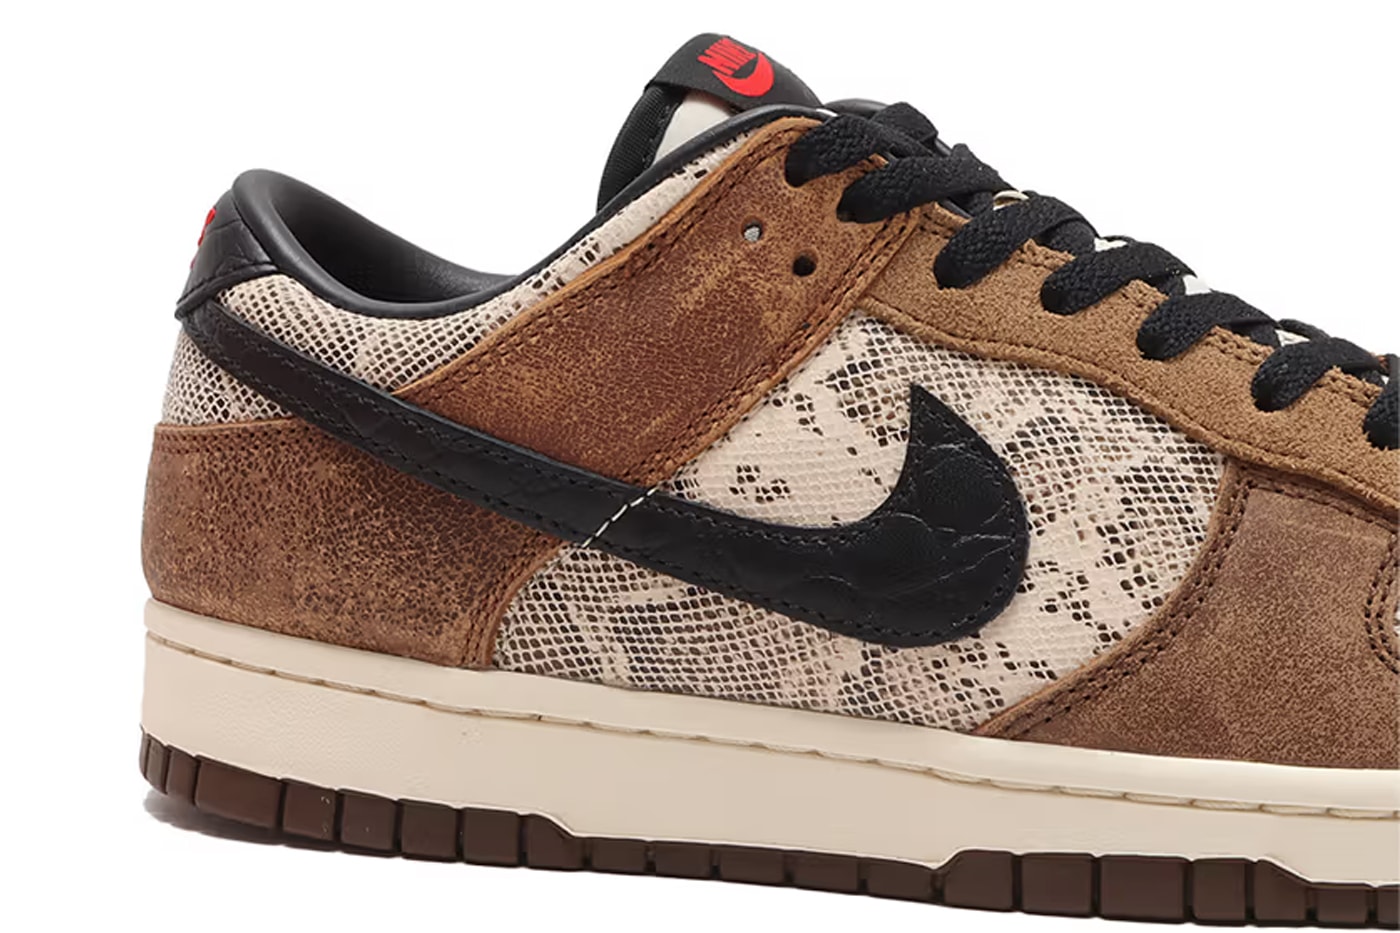 Atmos nike co jp tournament head 2 head pack 8 SNKRS Air max 1 prm dunk low prm snakeskin pattern release info date price